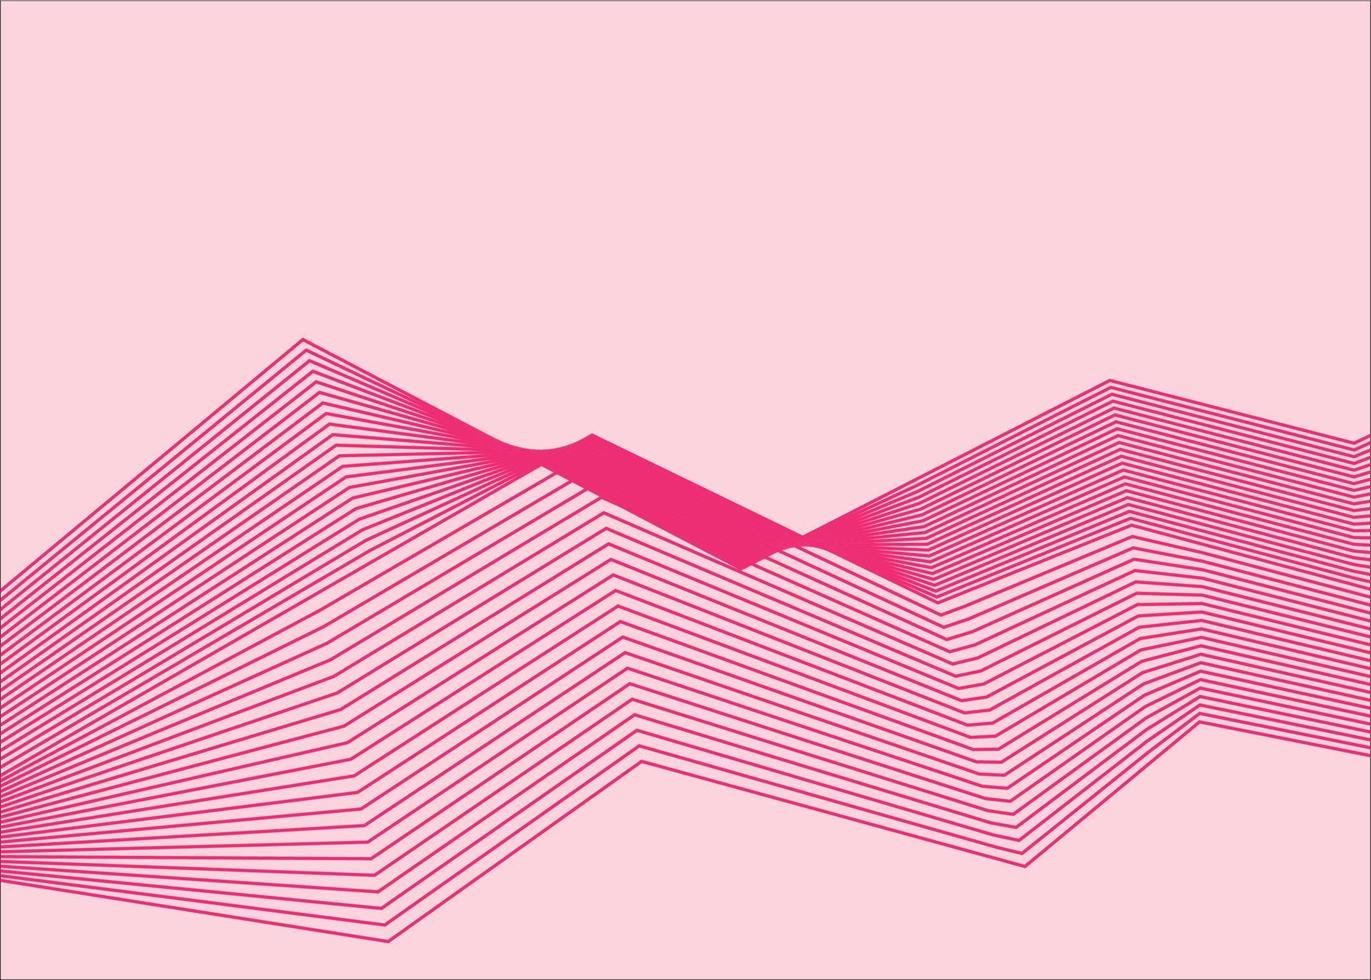 Background with abstract sharp pink lines. Dynamic sound wave. Optical art design element. Vector background.